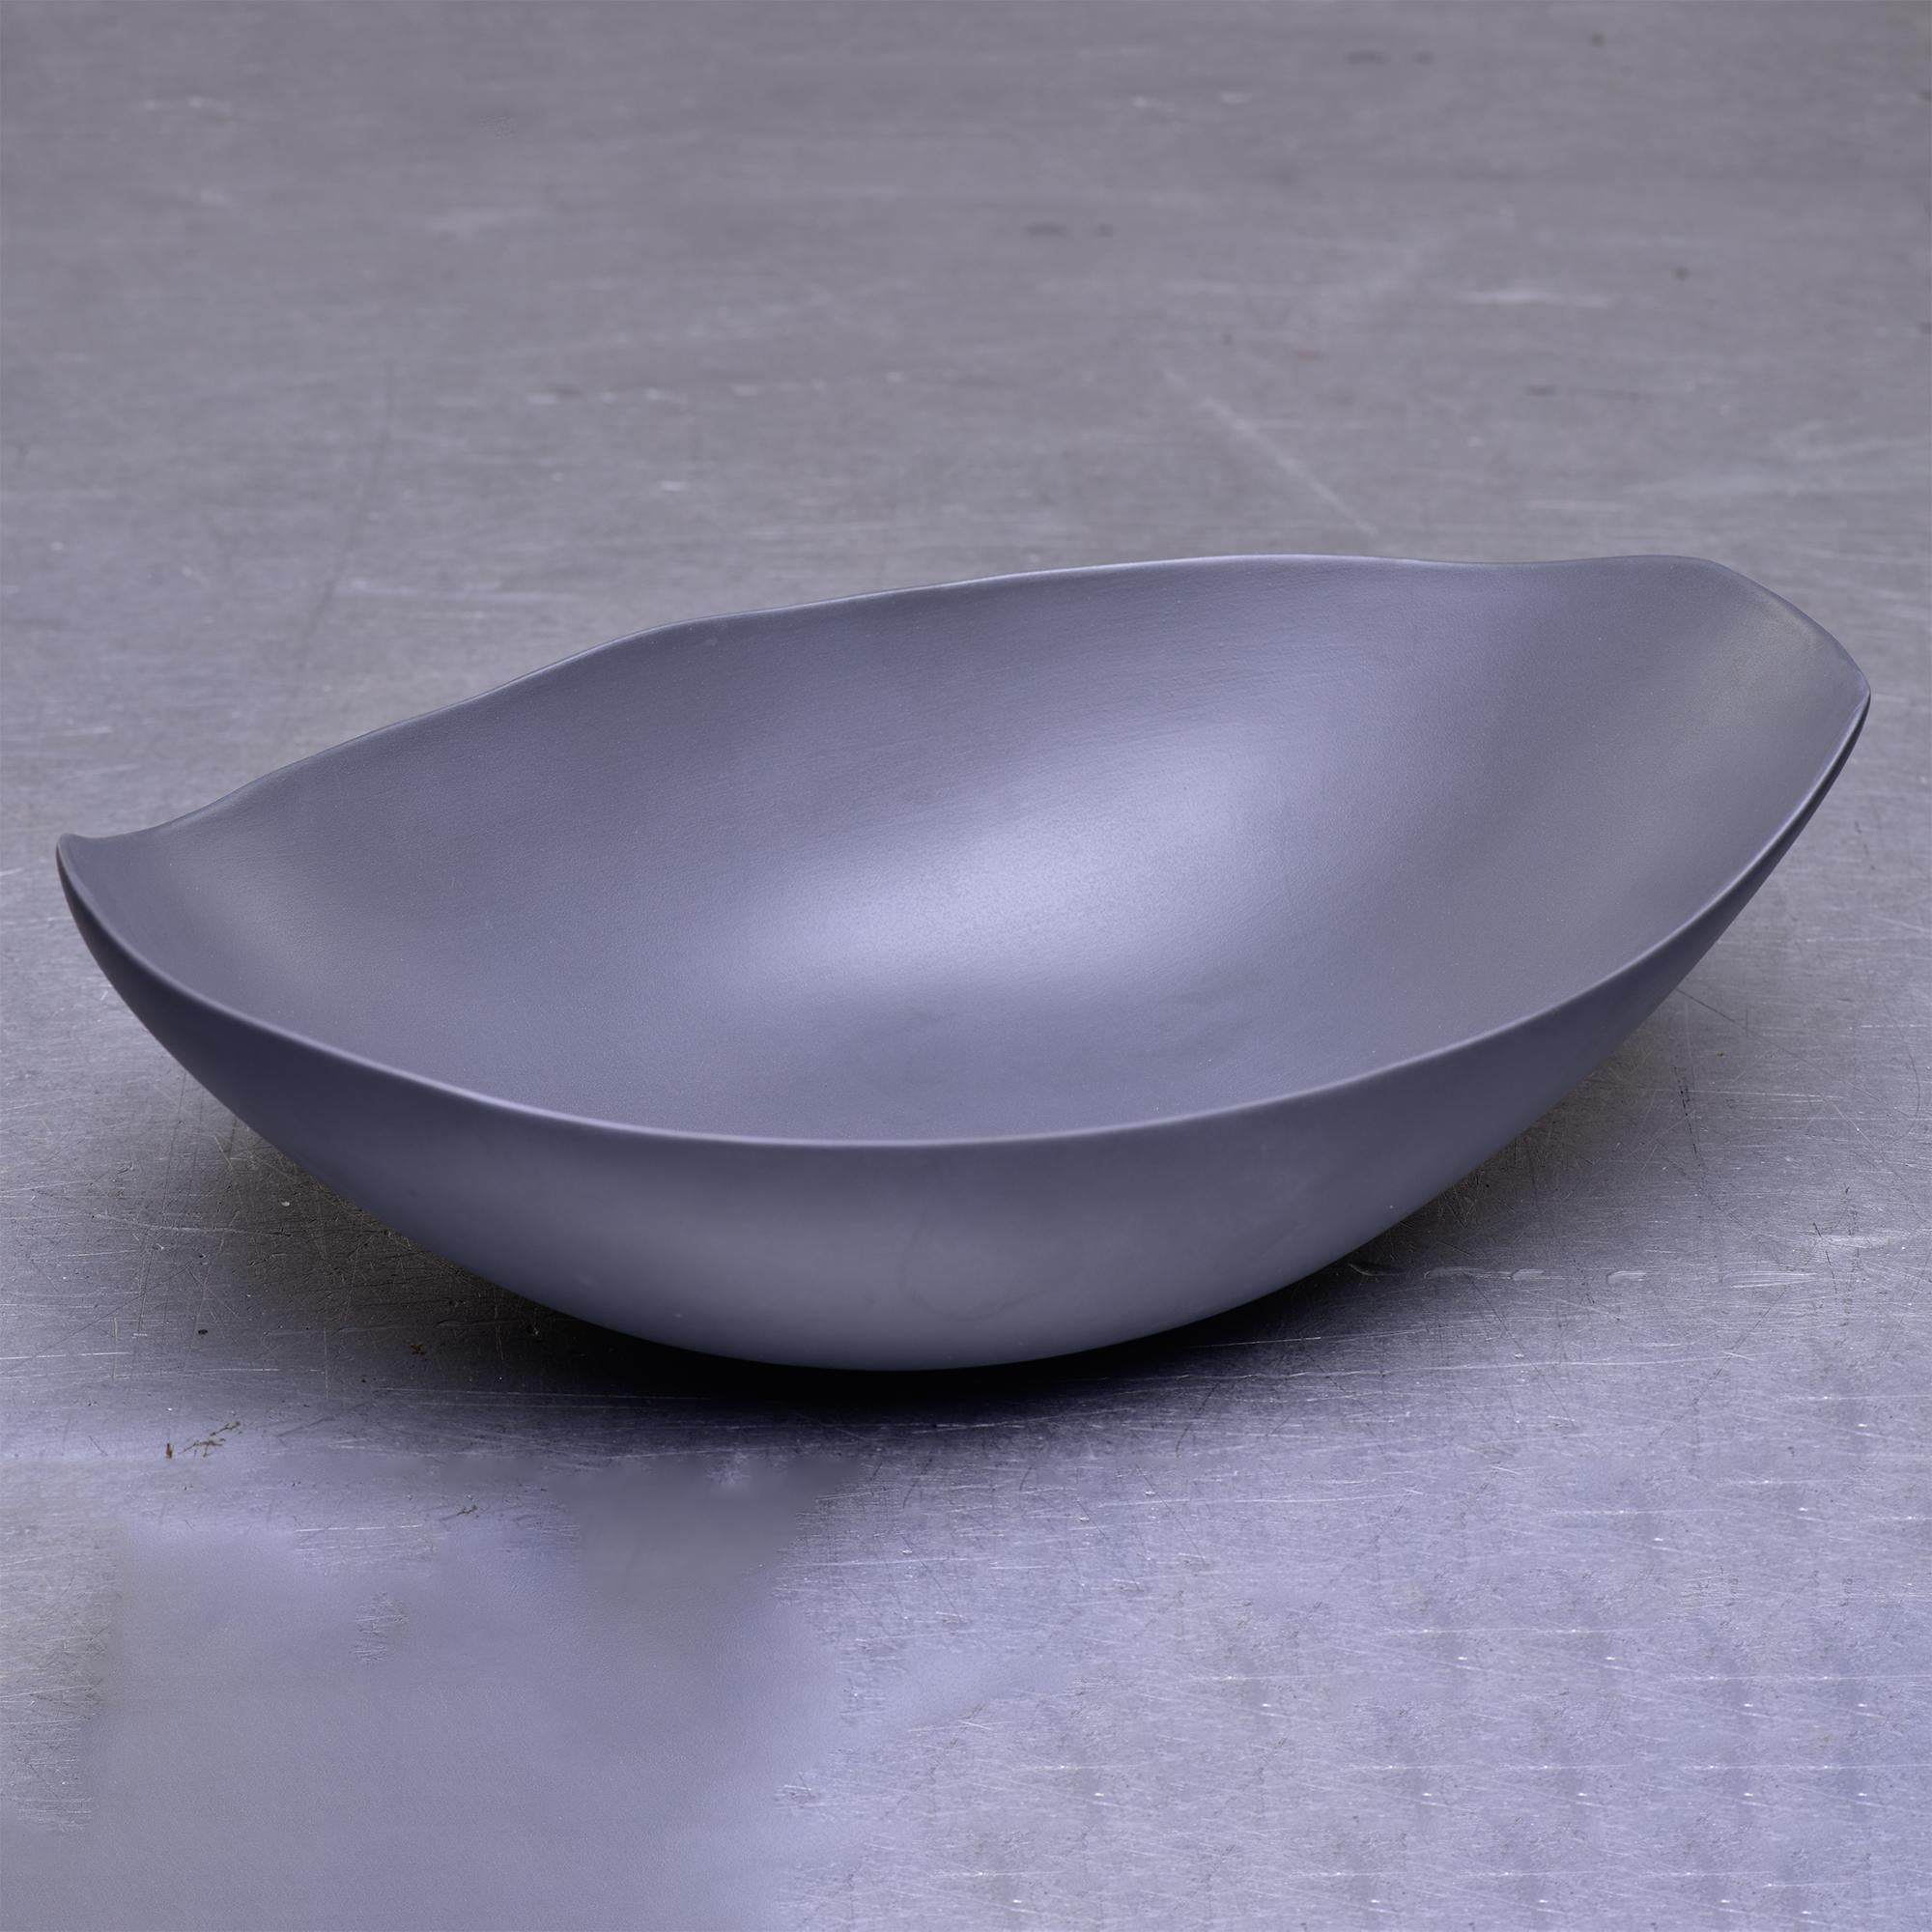 New Italian art pottery center bowl by Rina Menardi has an elongated irregular shape, delicate thin walls and a neutral graphite color glaze. Other pieces from this maker available. 
  